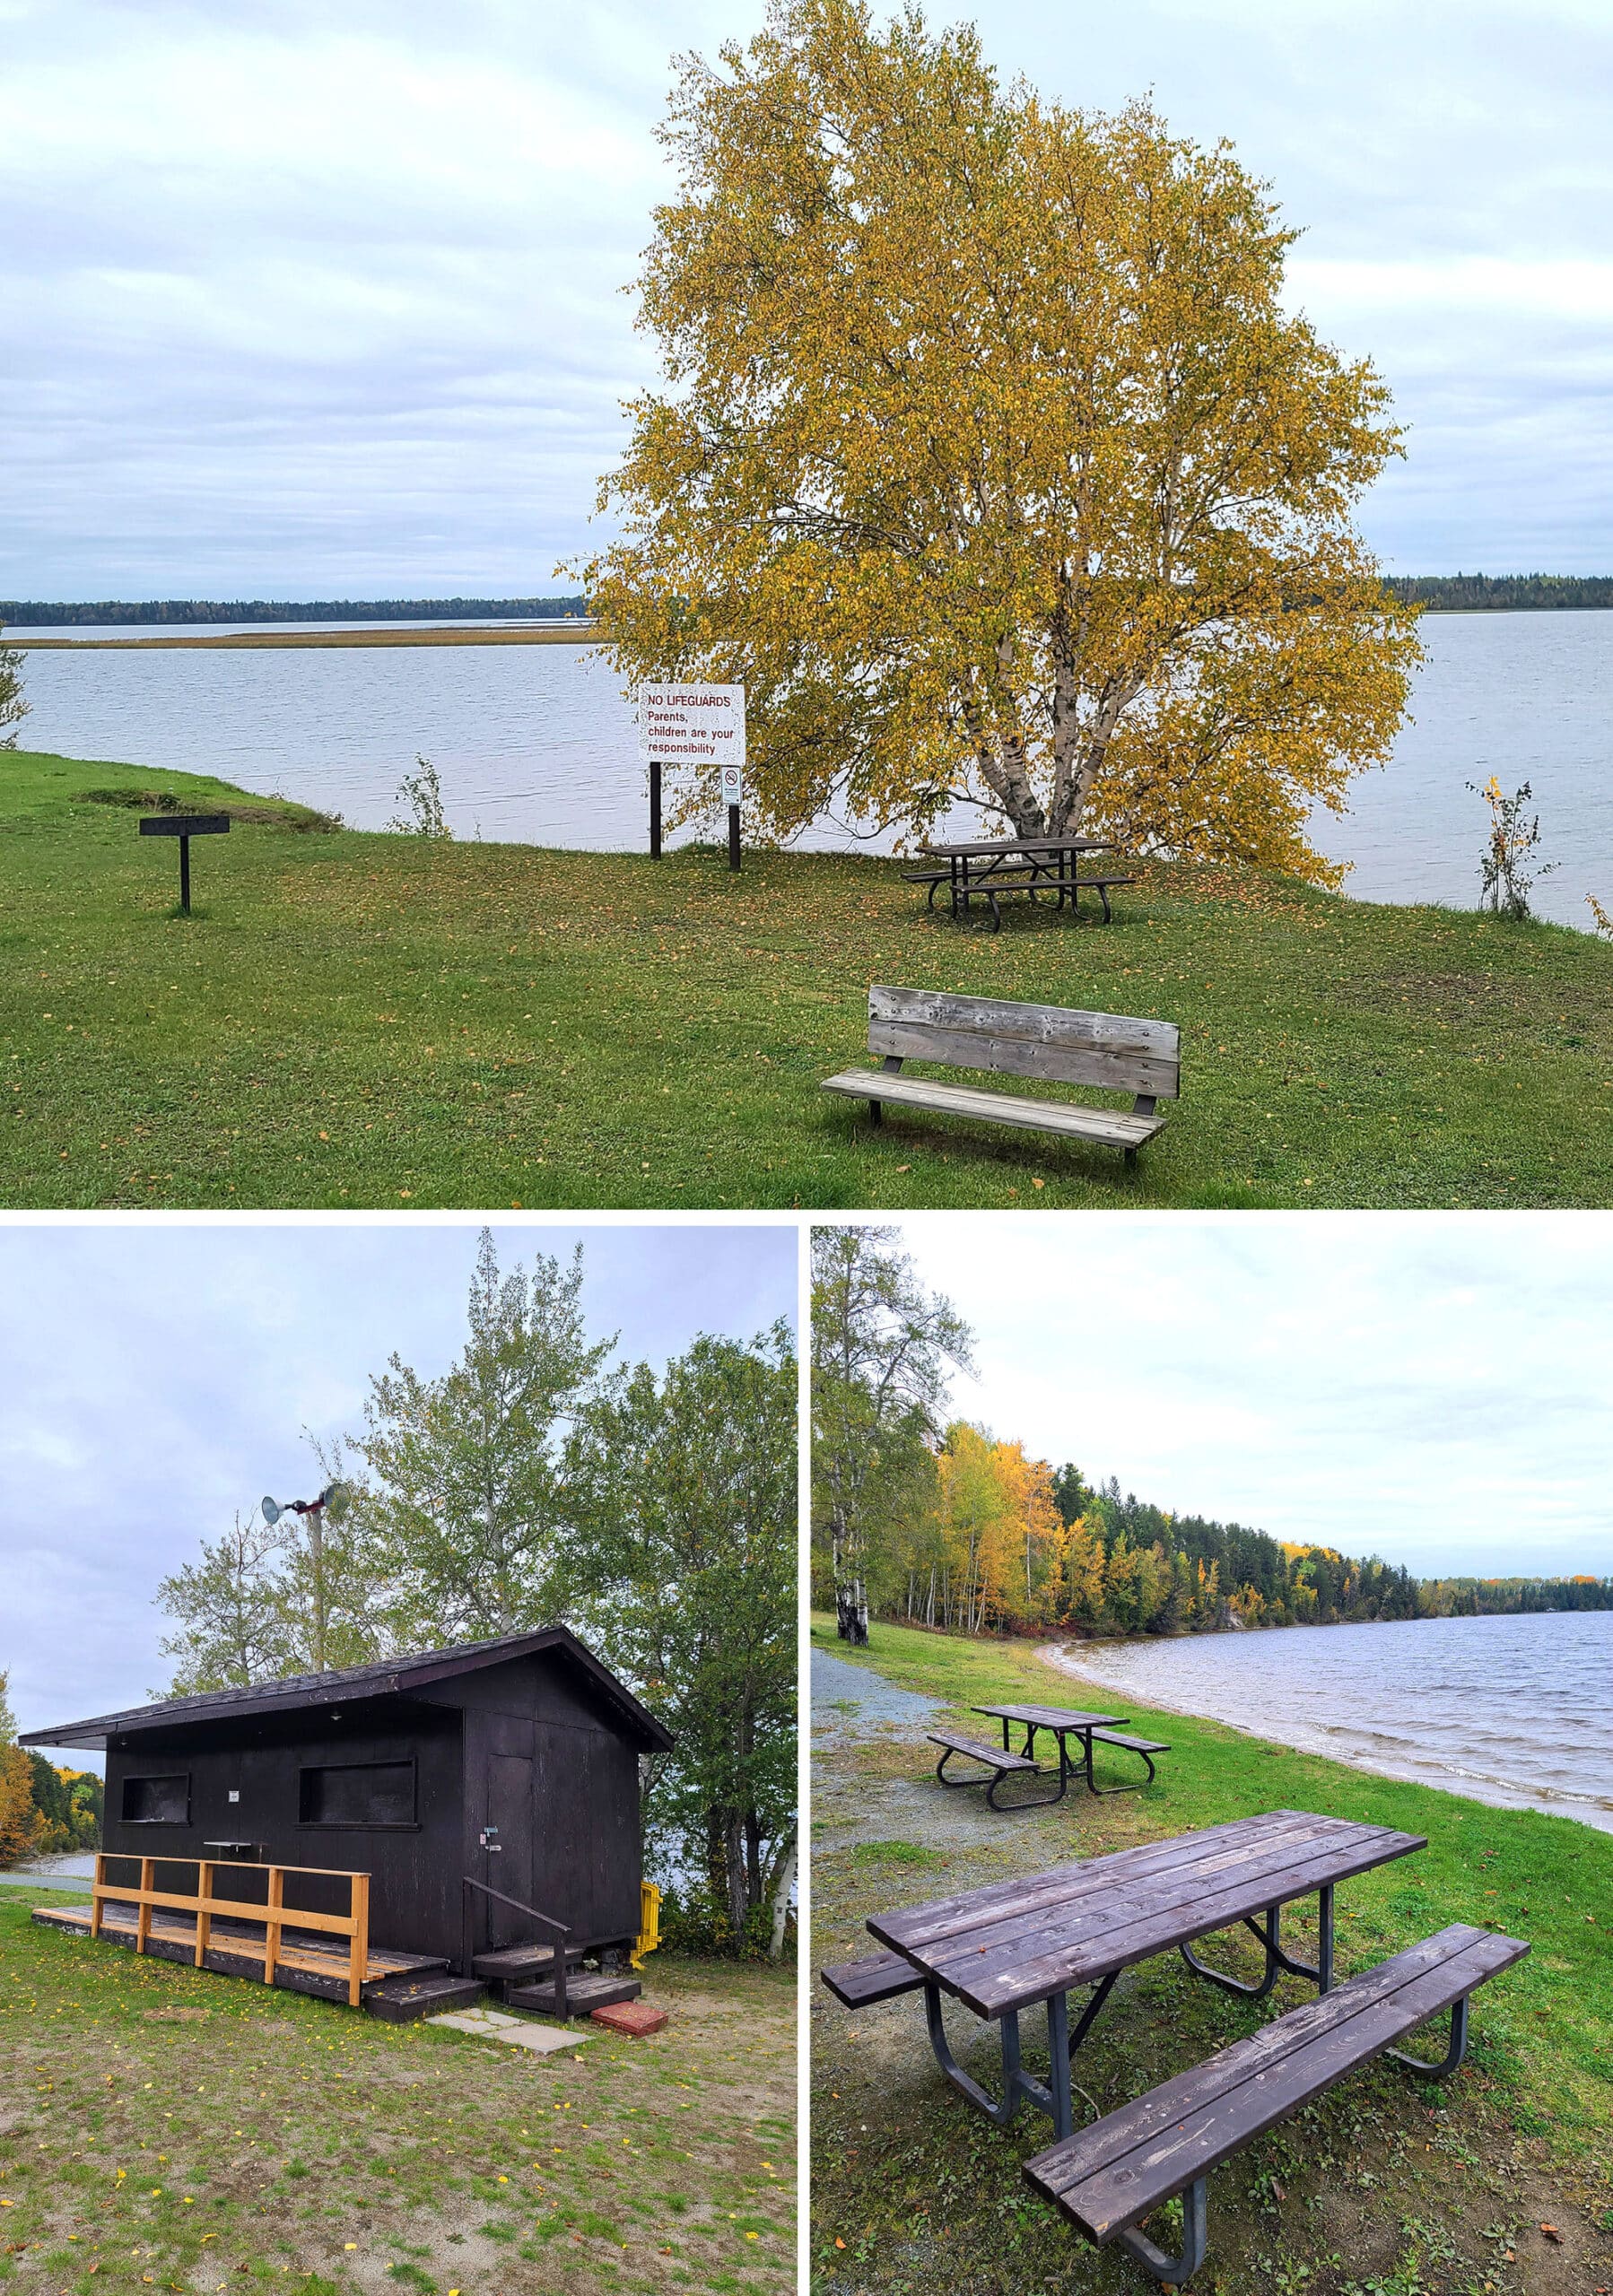 3 part image showing the picnic and day use area at MacLeod provincial park, including a small, run down building.